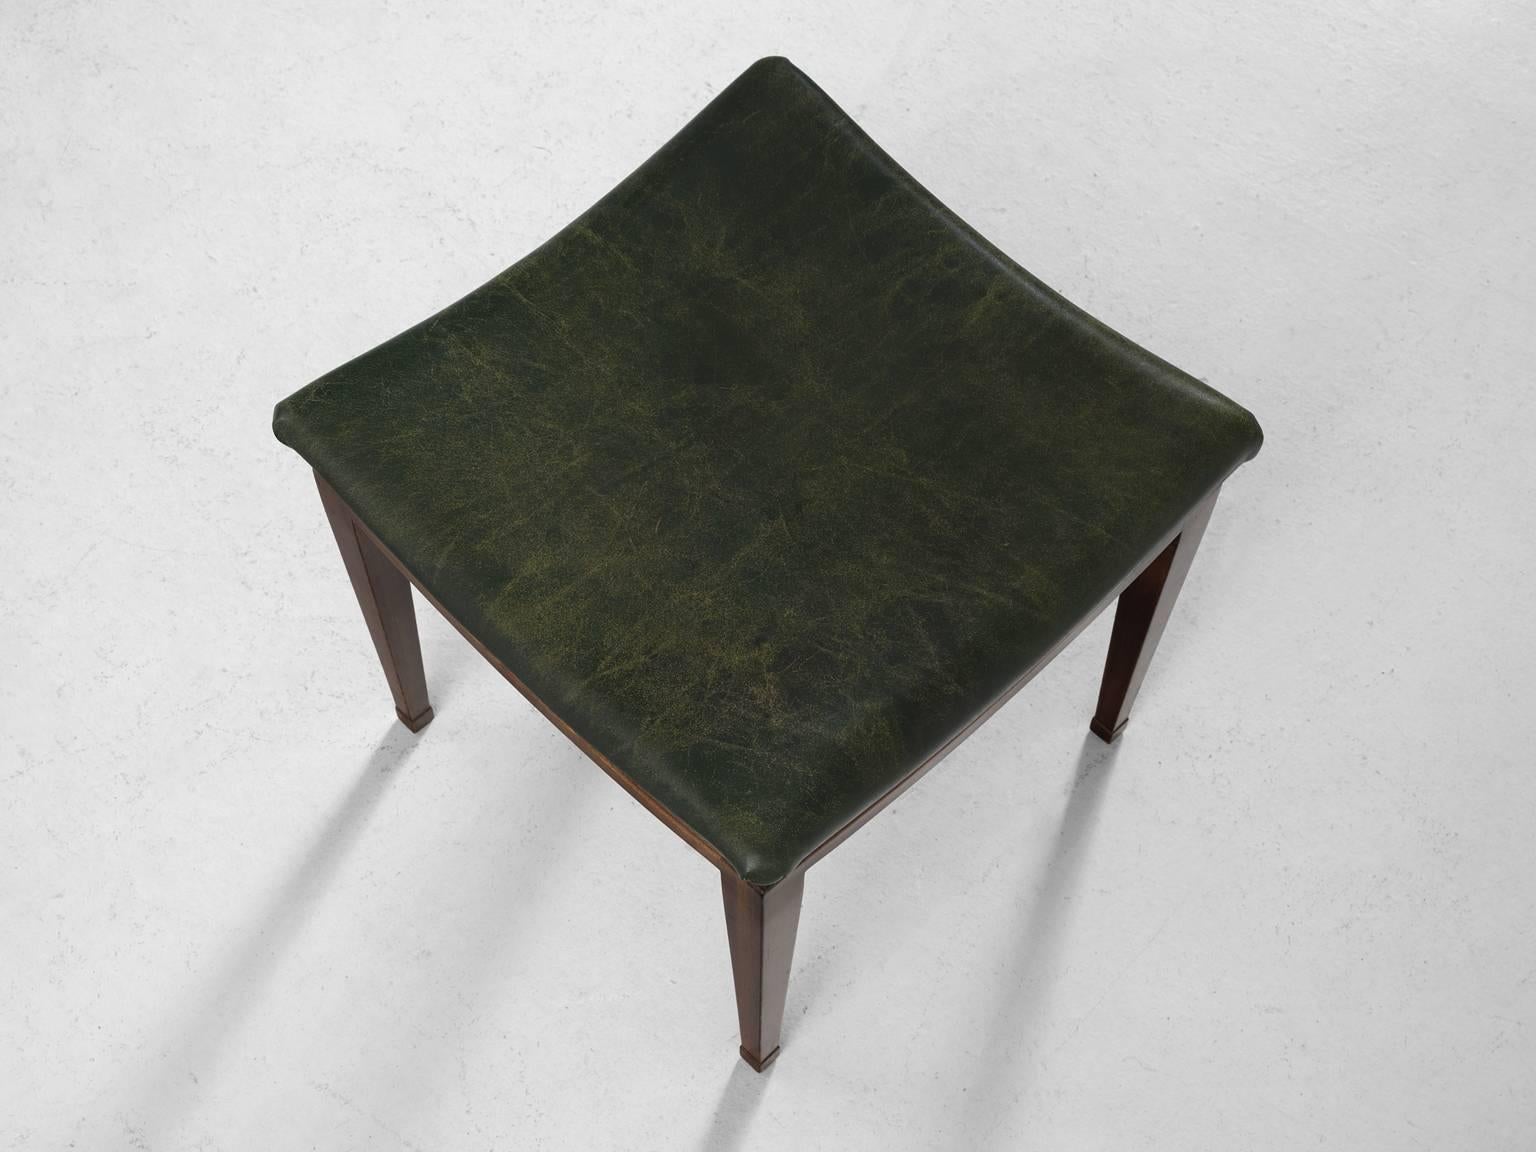 Scandinavian Modern Frits Henningsen Stool in Mahogany and Patinated Leather